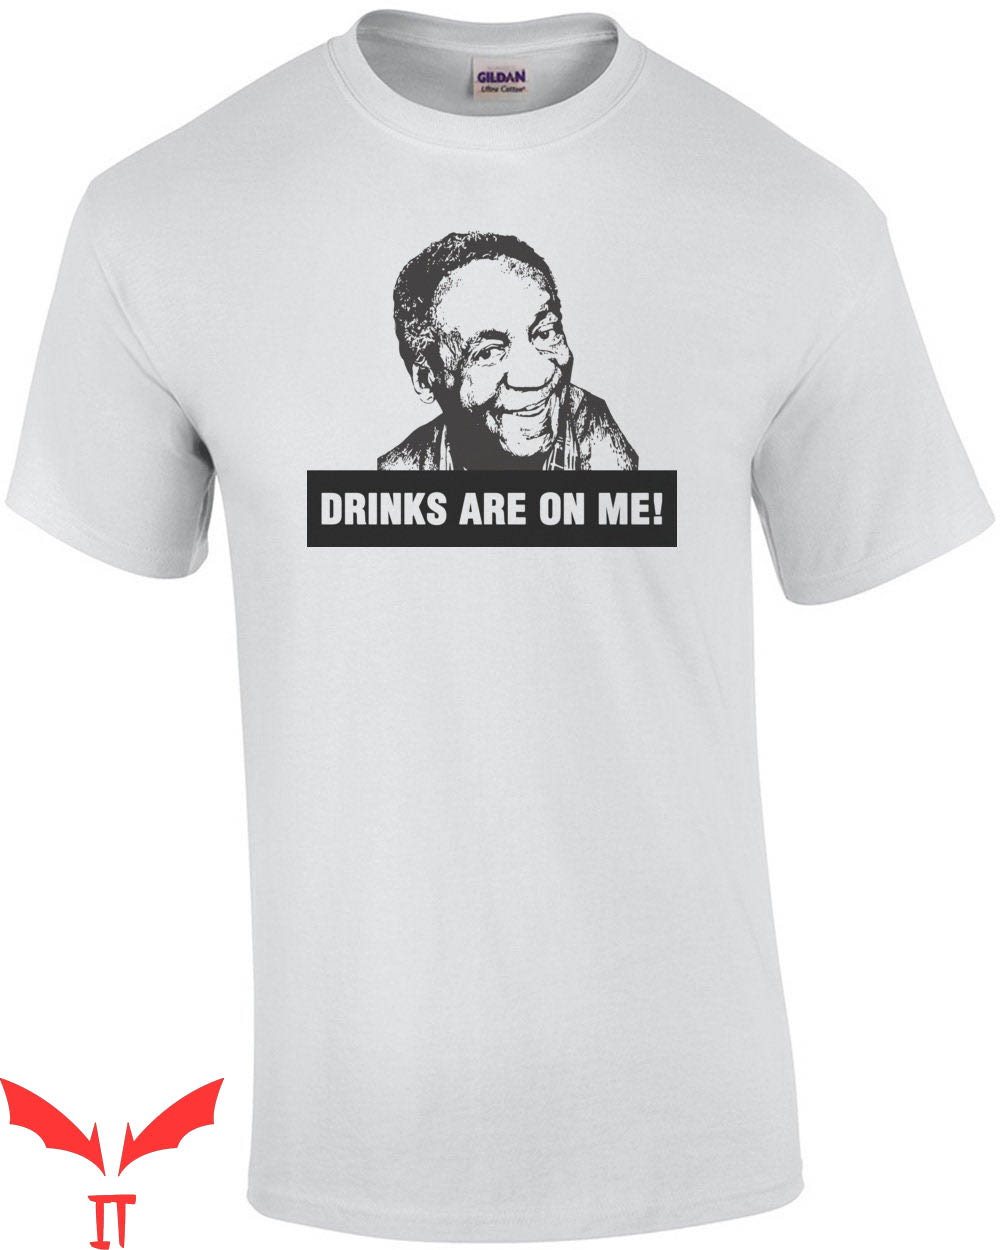 Bill Cosby T-Shirt Cosby Drinks Are On Me Funny Meme Tee